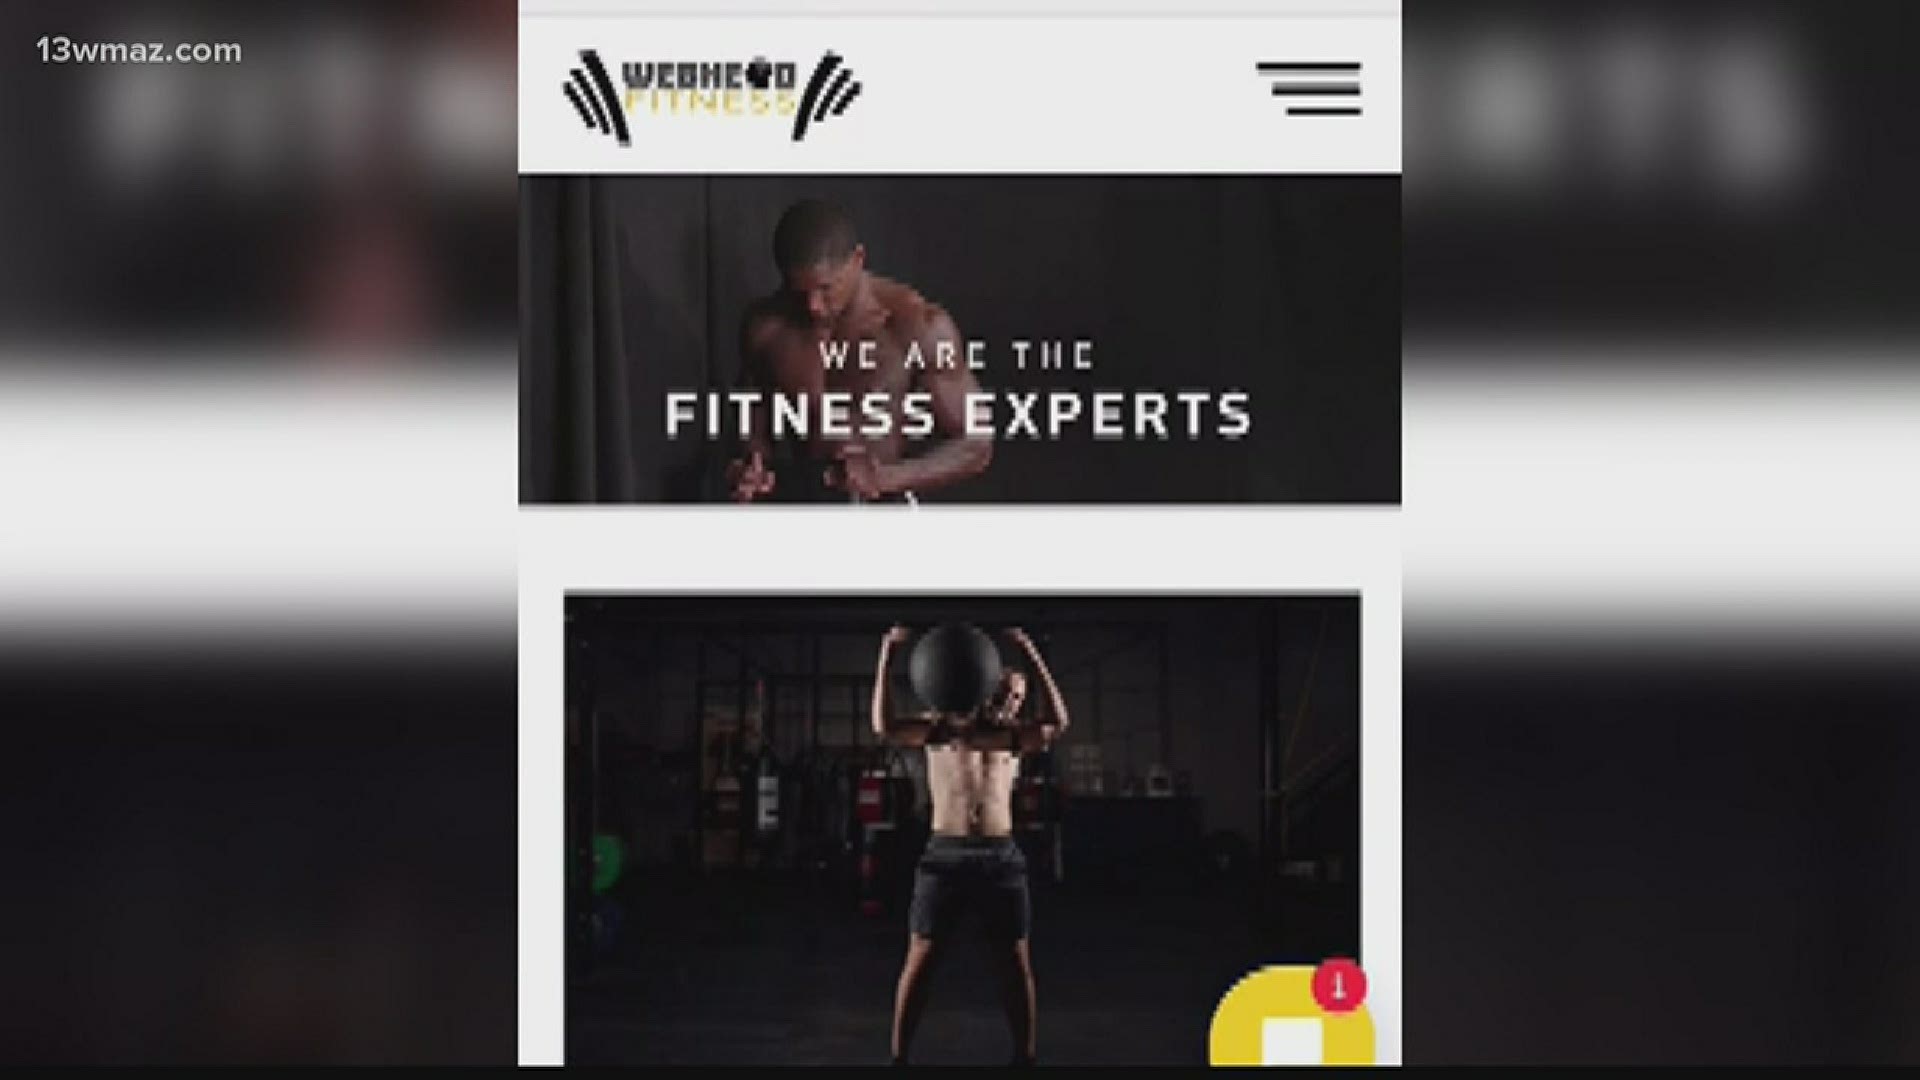 Joshua and Justin Marcus created Webhead Fitness, a site where they give a platform for personal trainers to market themselves to clients while earning their worth.